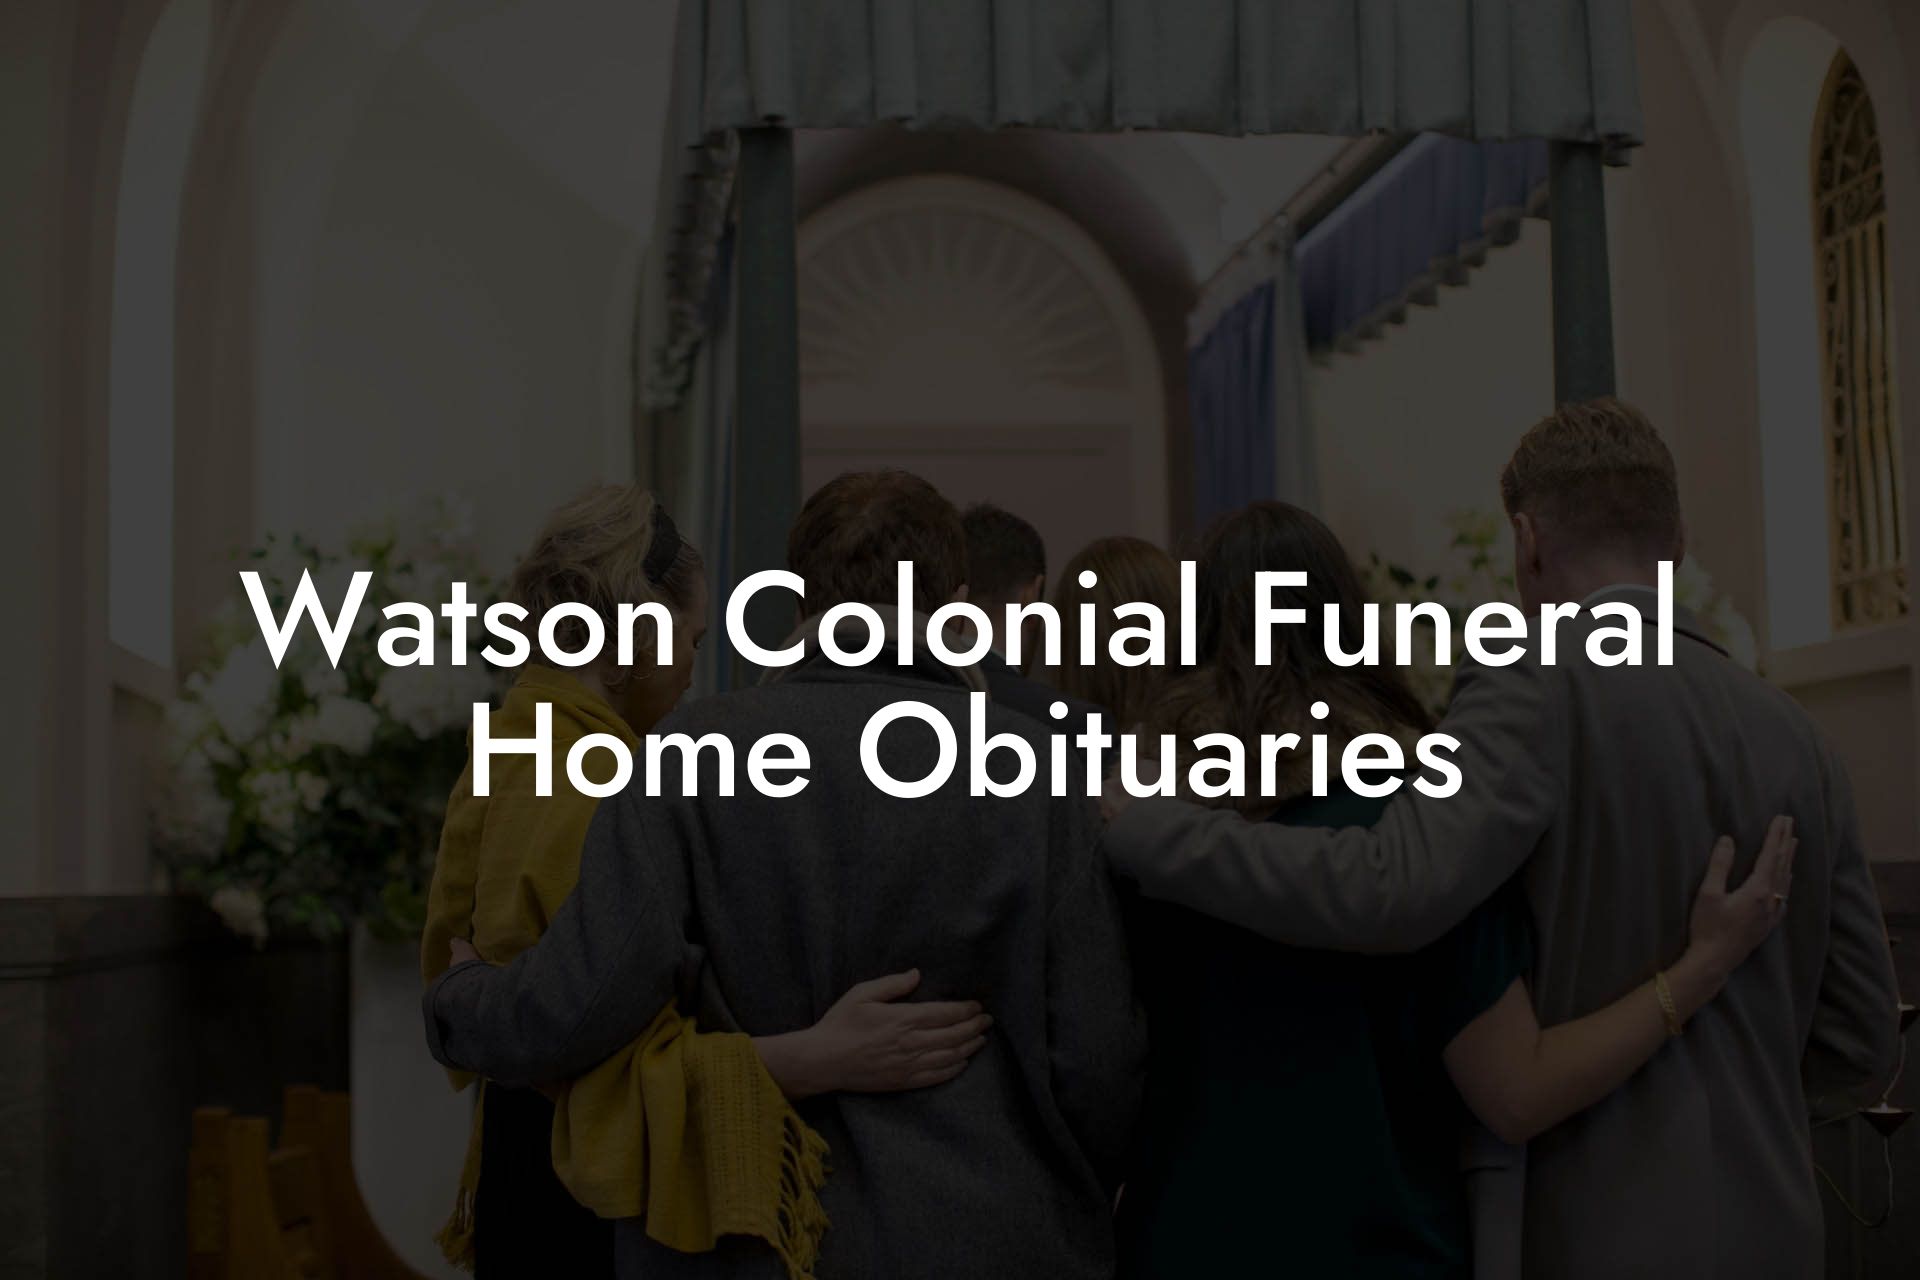 Watson Colonial Funeral Home Obituaries